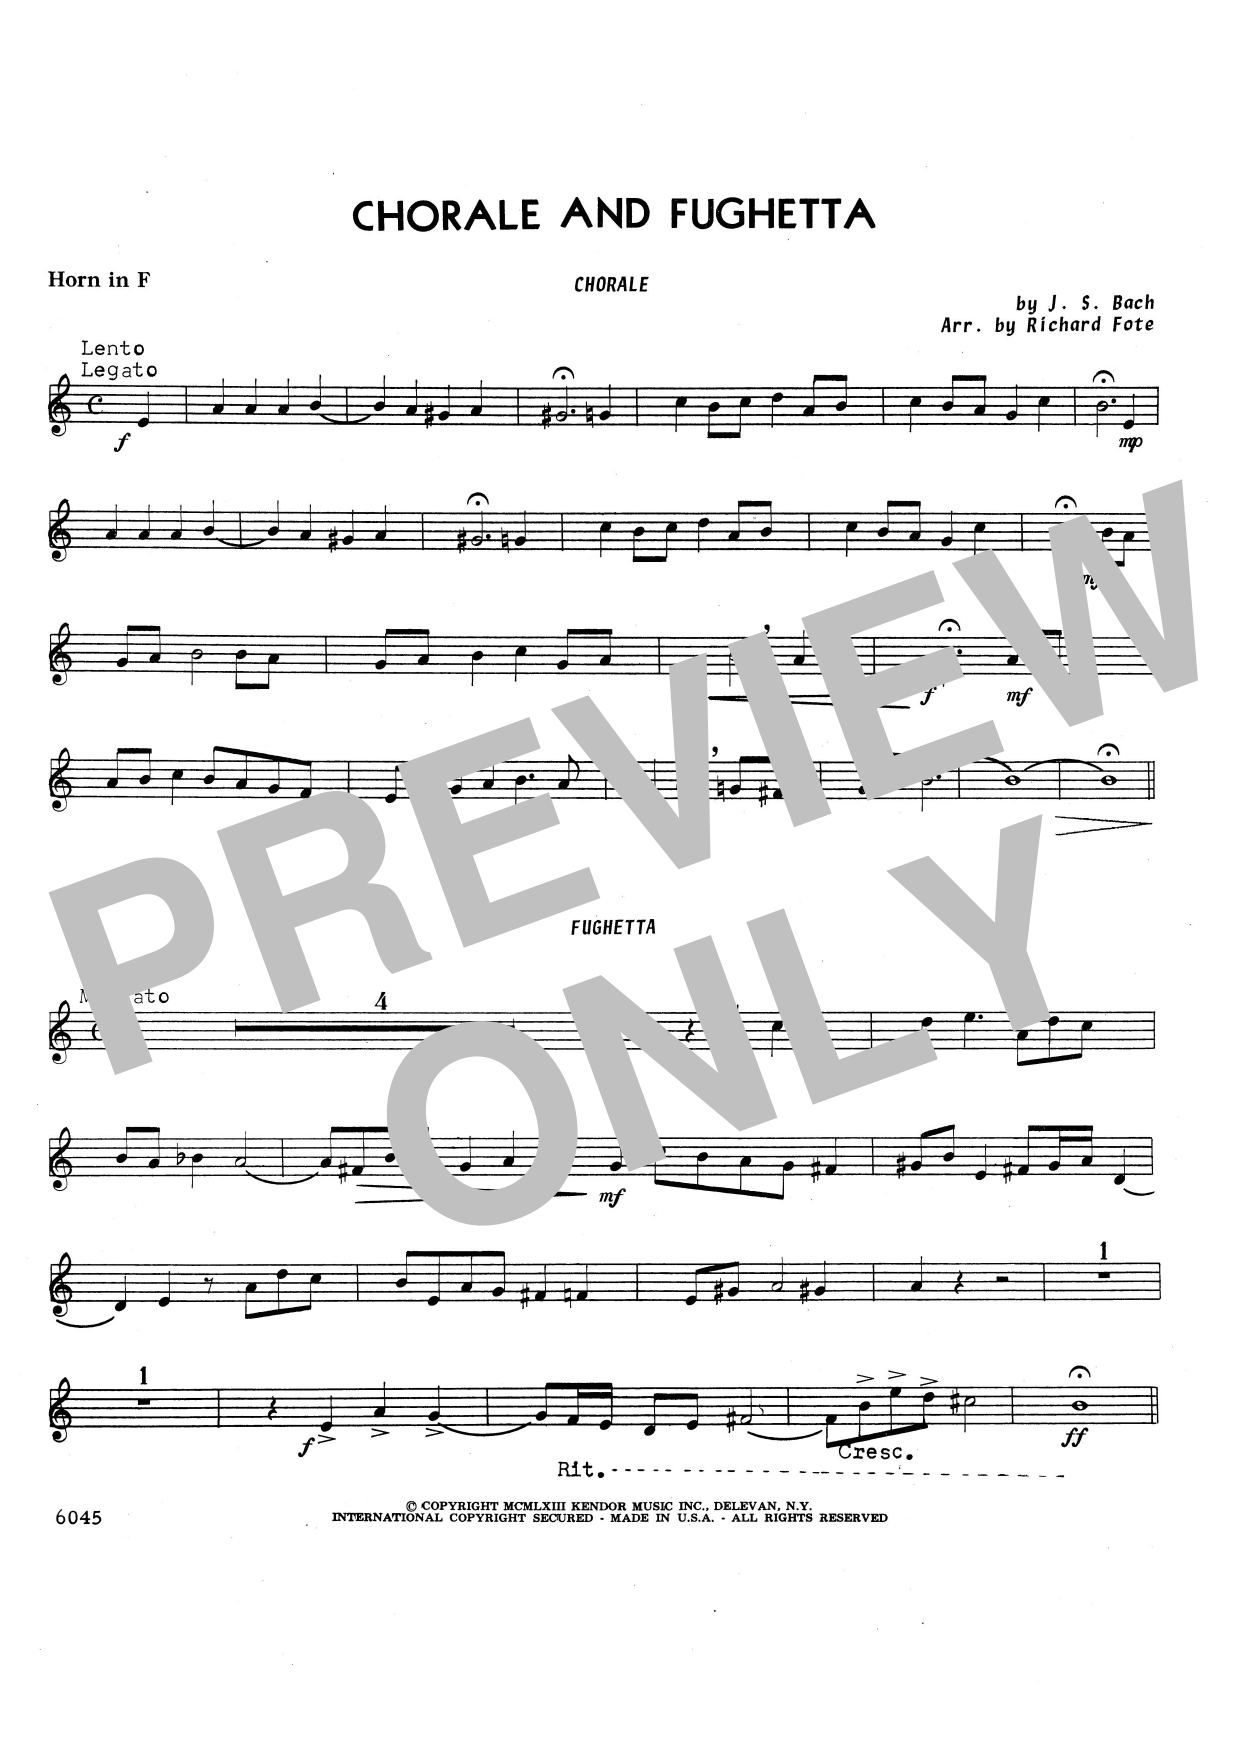 Download Richard Fote Chorale And Fughetta - Horn in F Sheet Music